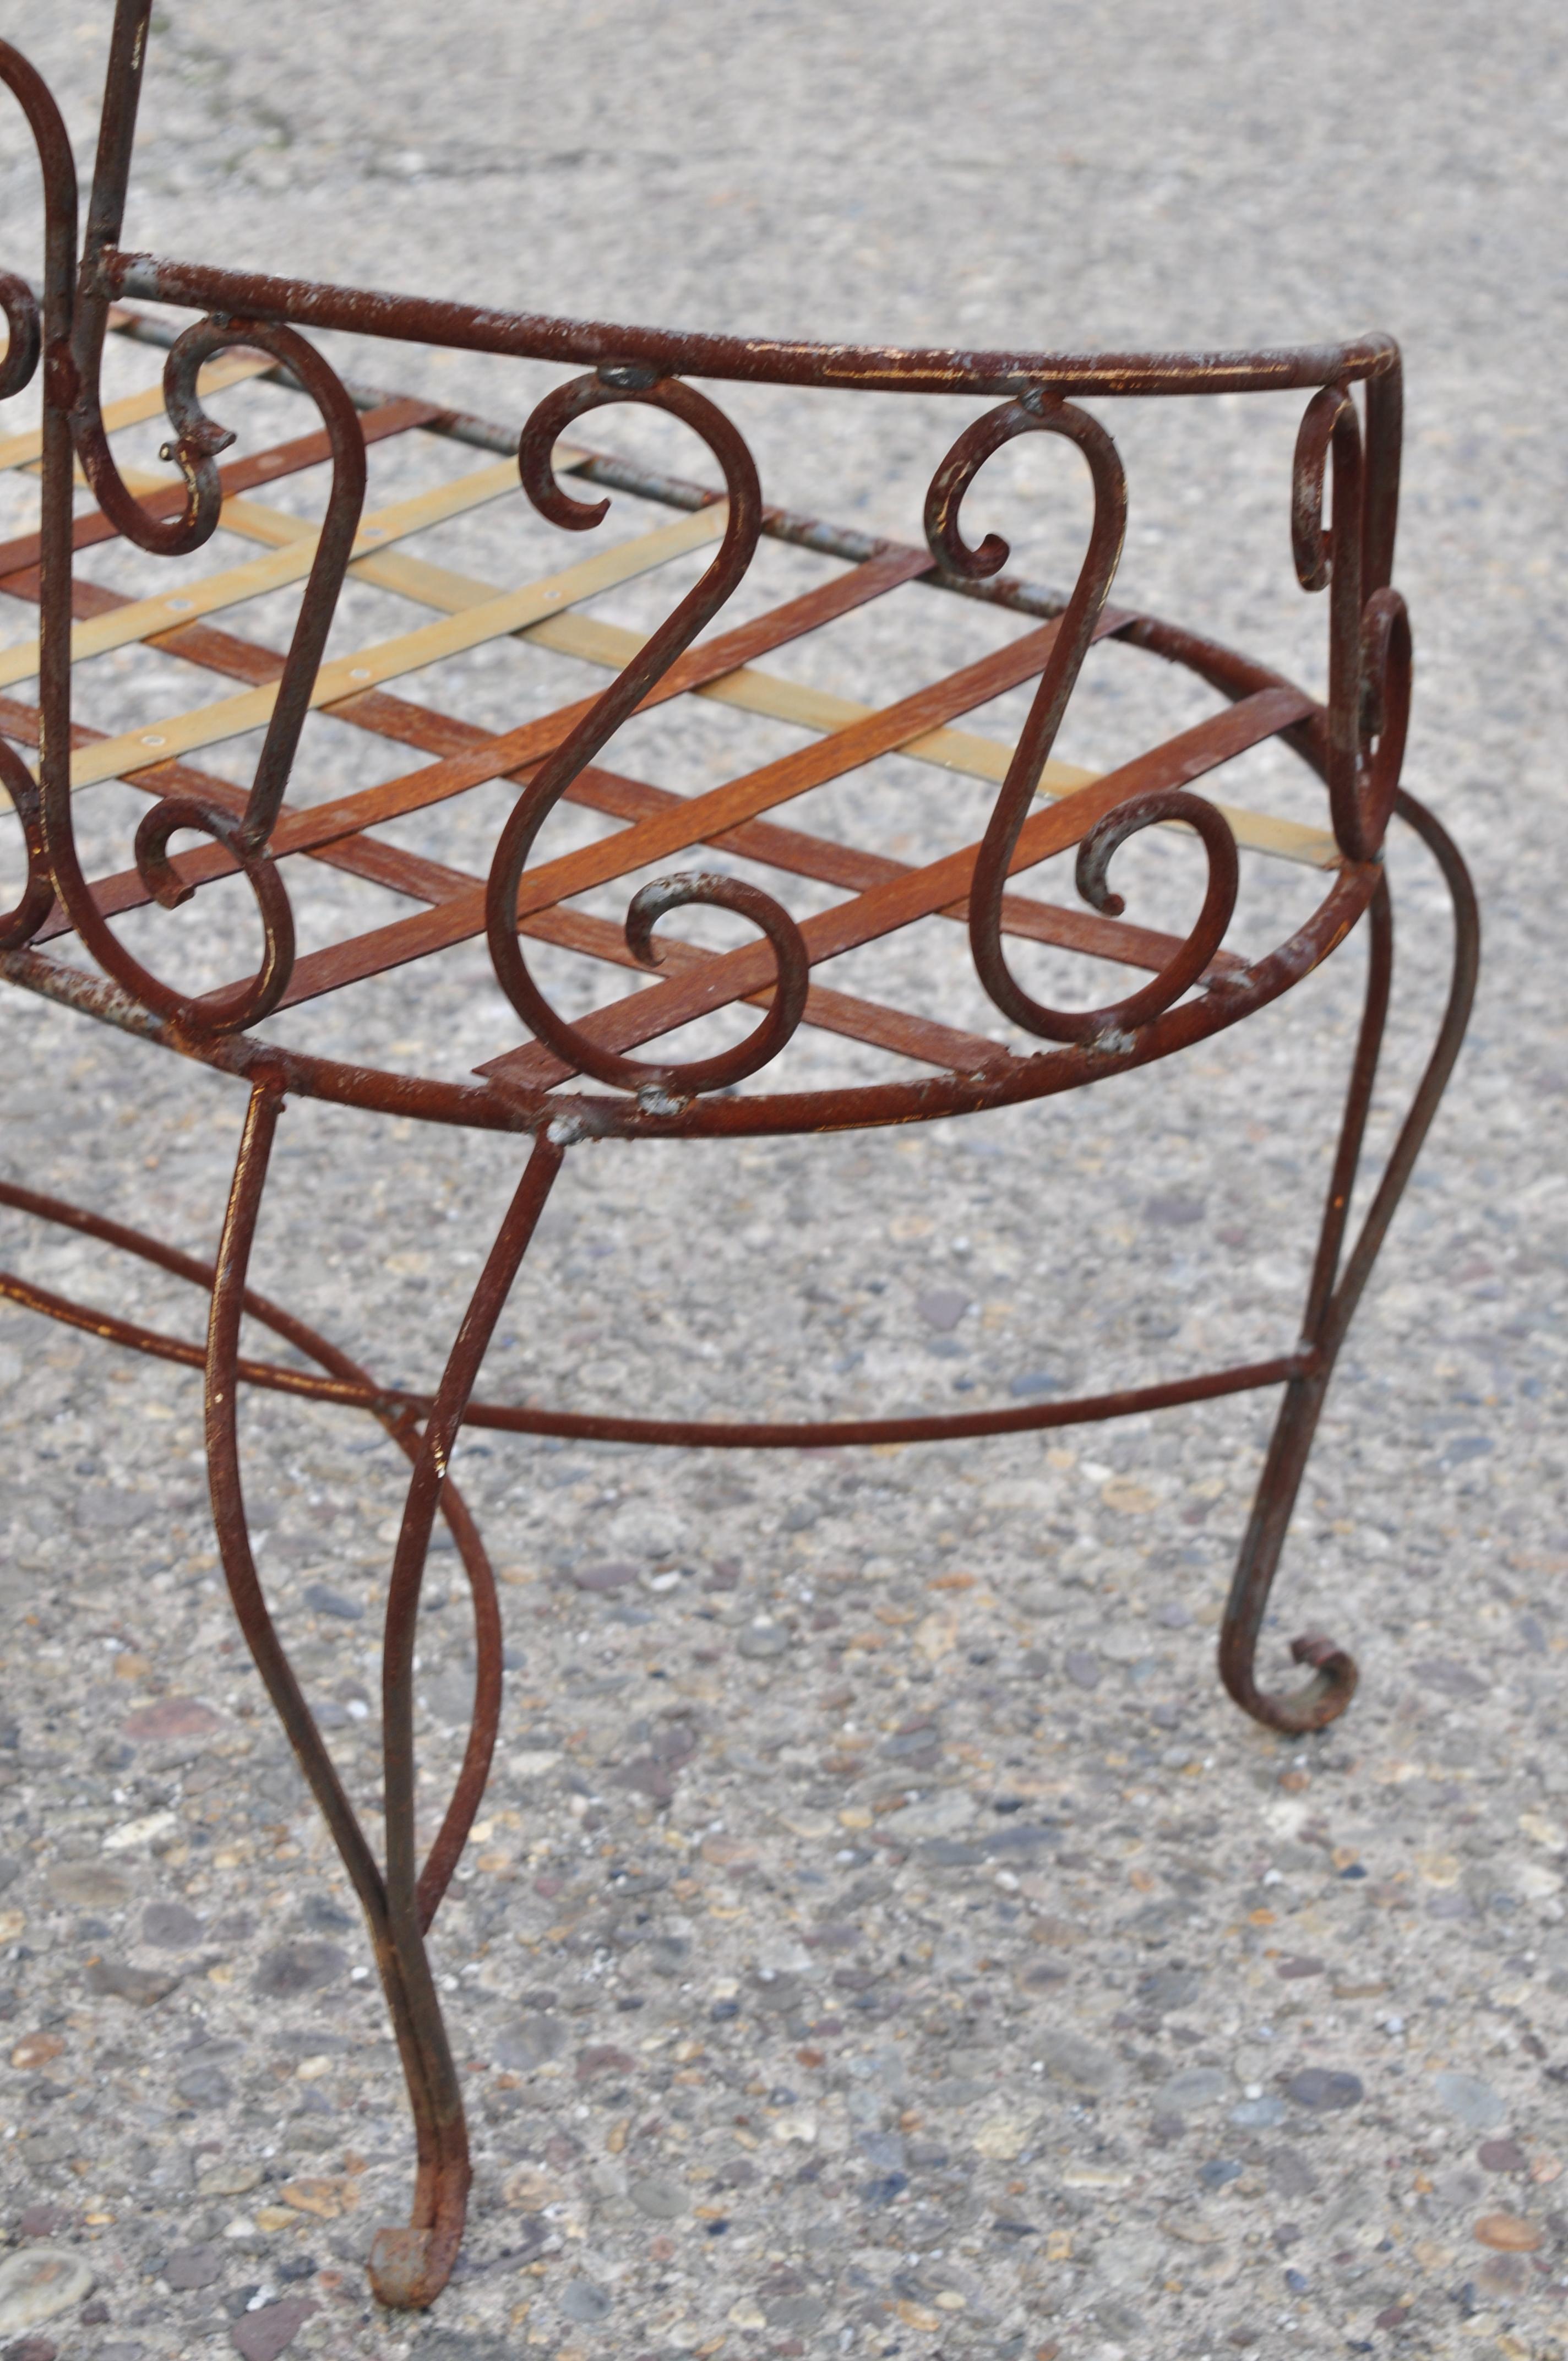 Vintage French Victorian Style Wrought Iron Heart Back Garden Settee Bench 1